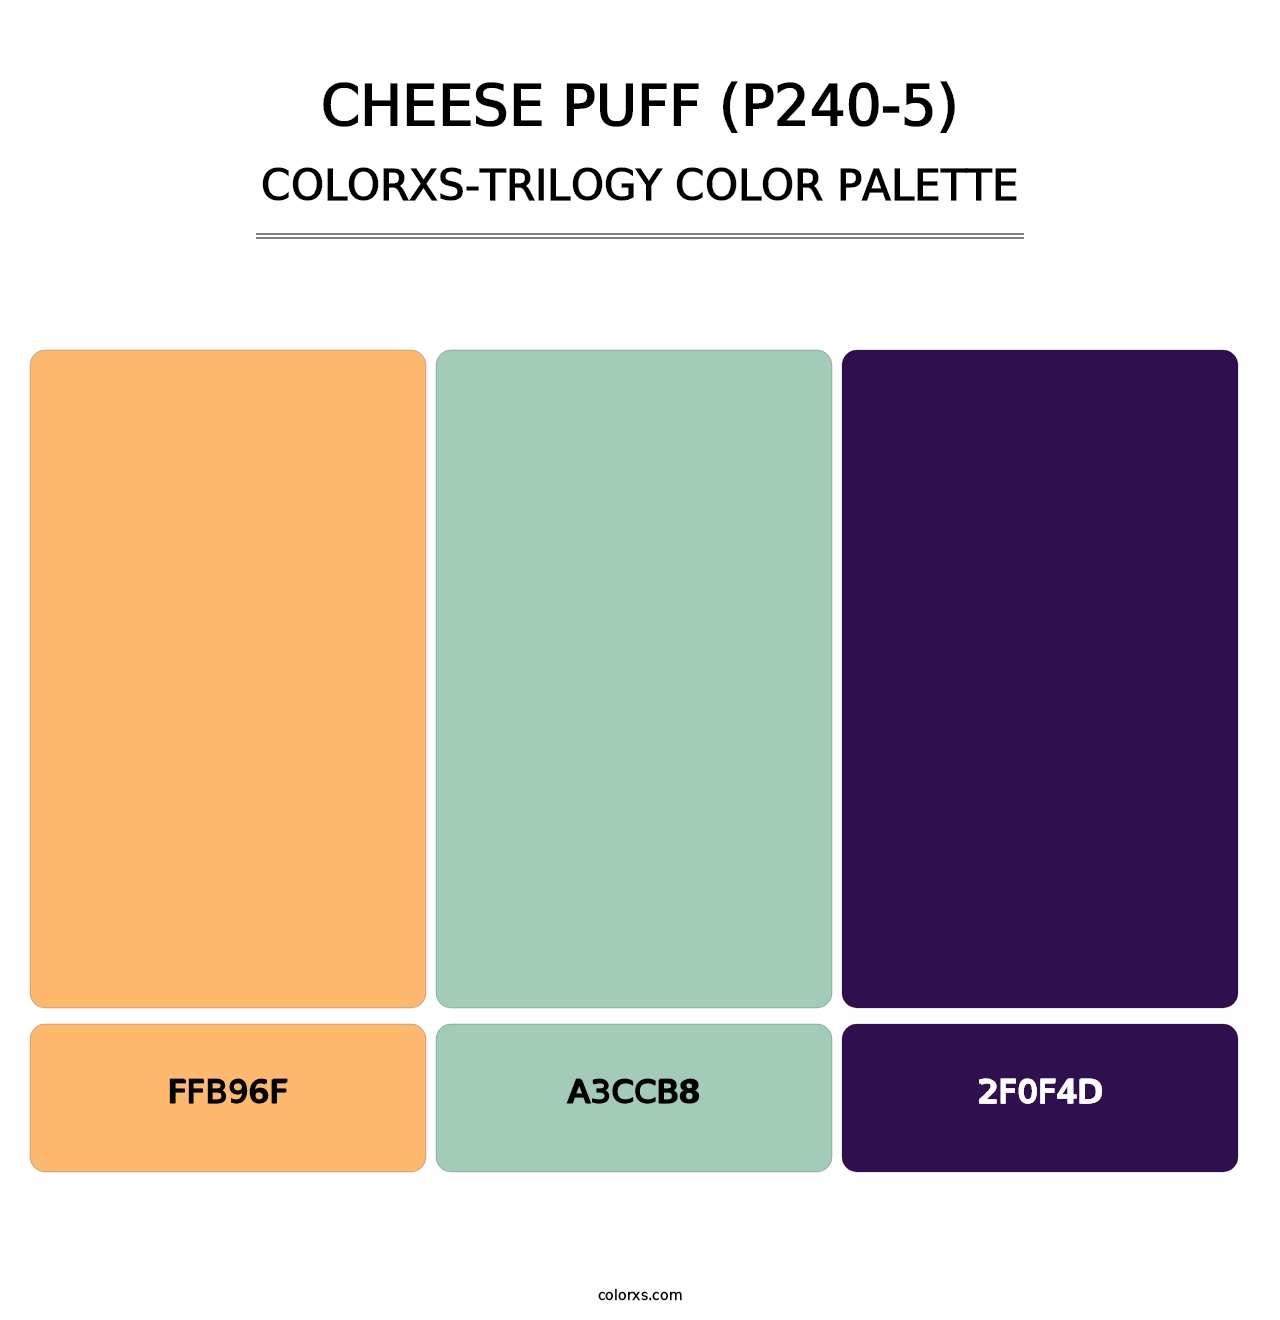 Cheese Puff (P240-5) - Colorxs Trilogy Palette